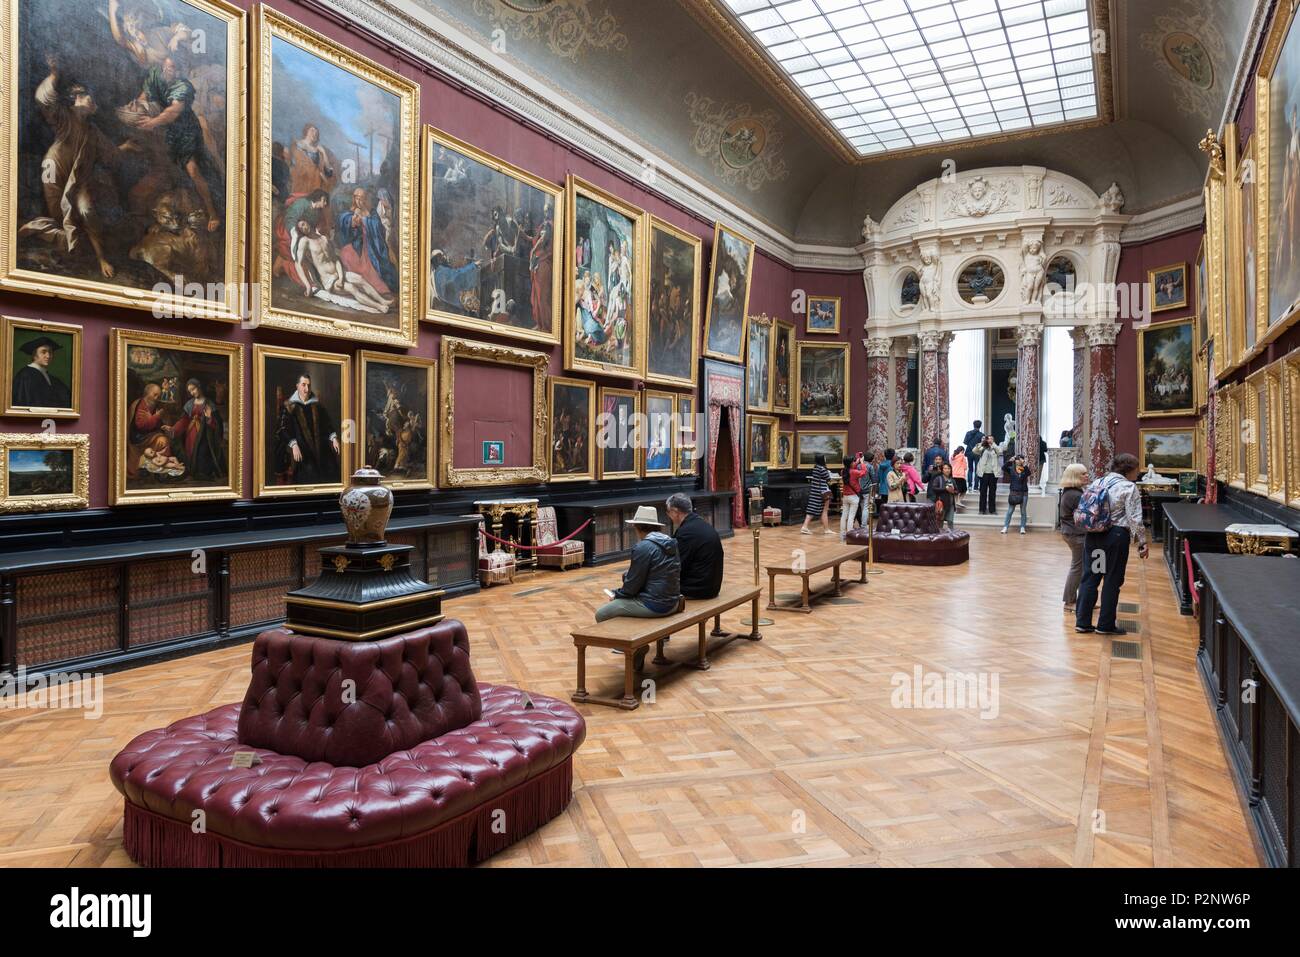 France, Oise, Chantilly, Domaine de Chantilly, Conde museum, painting gallery Stock Photo